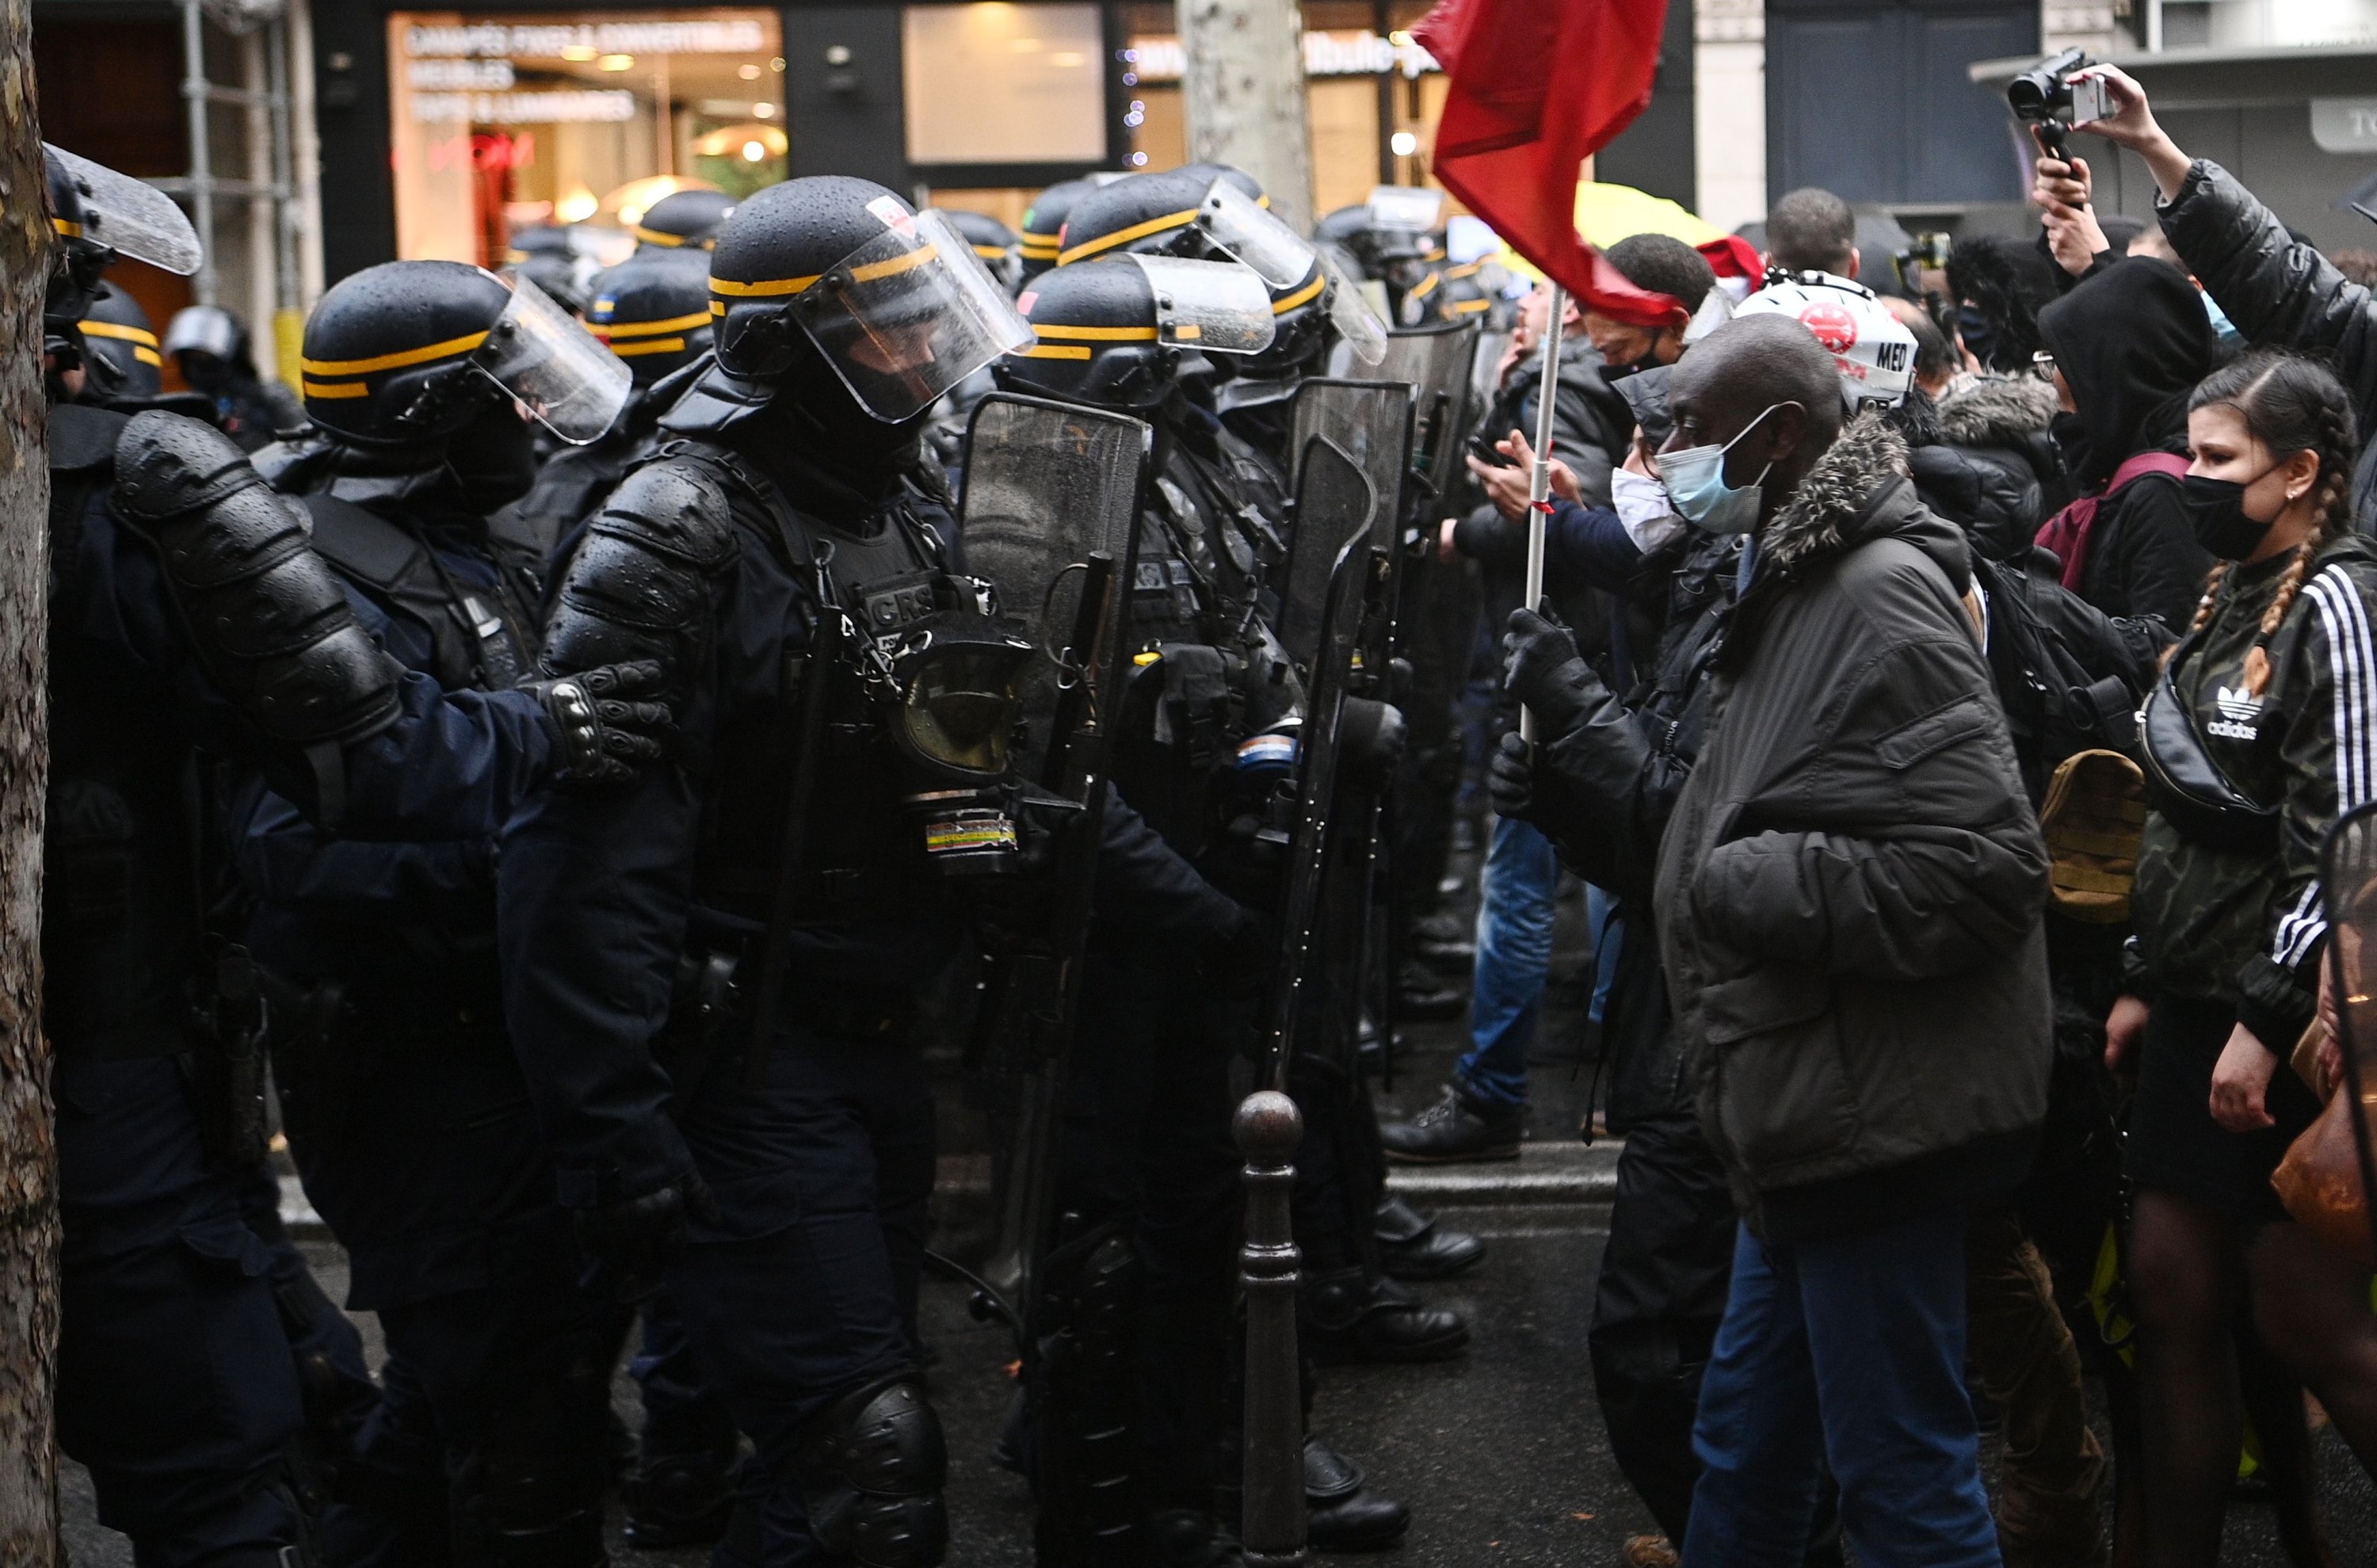 Nearly 150 arrested at Paris protest over security bill | Daily Sabah